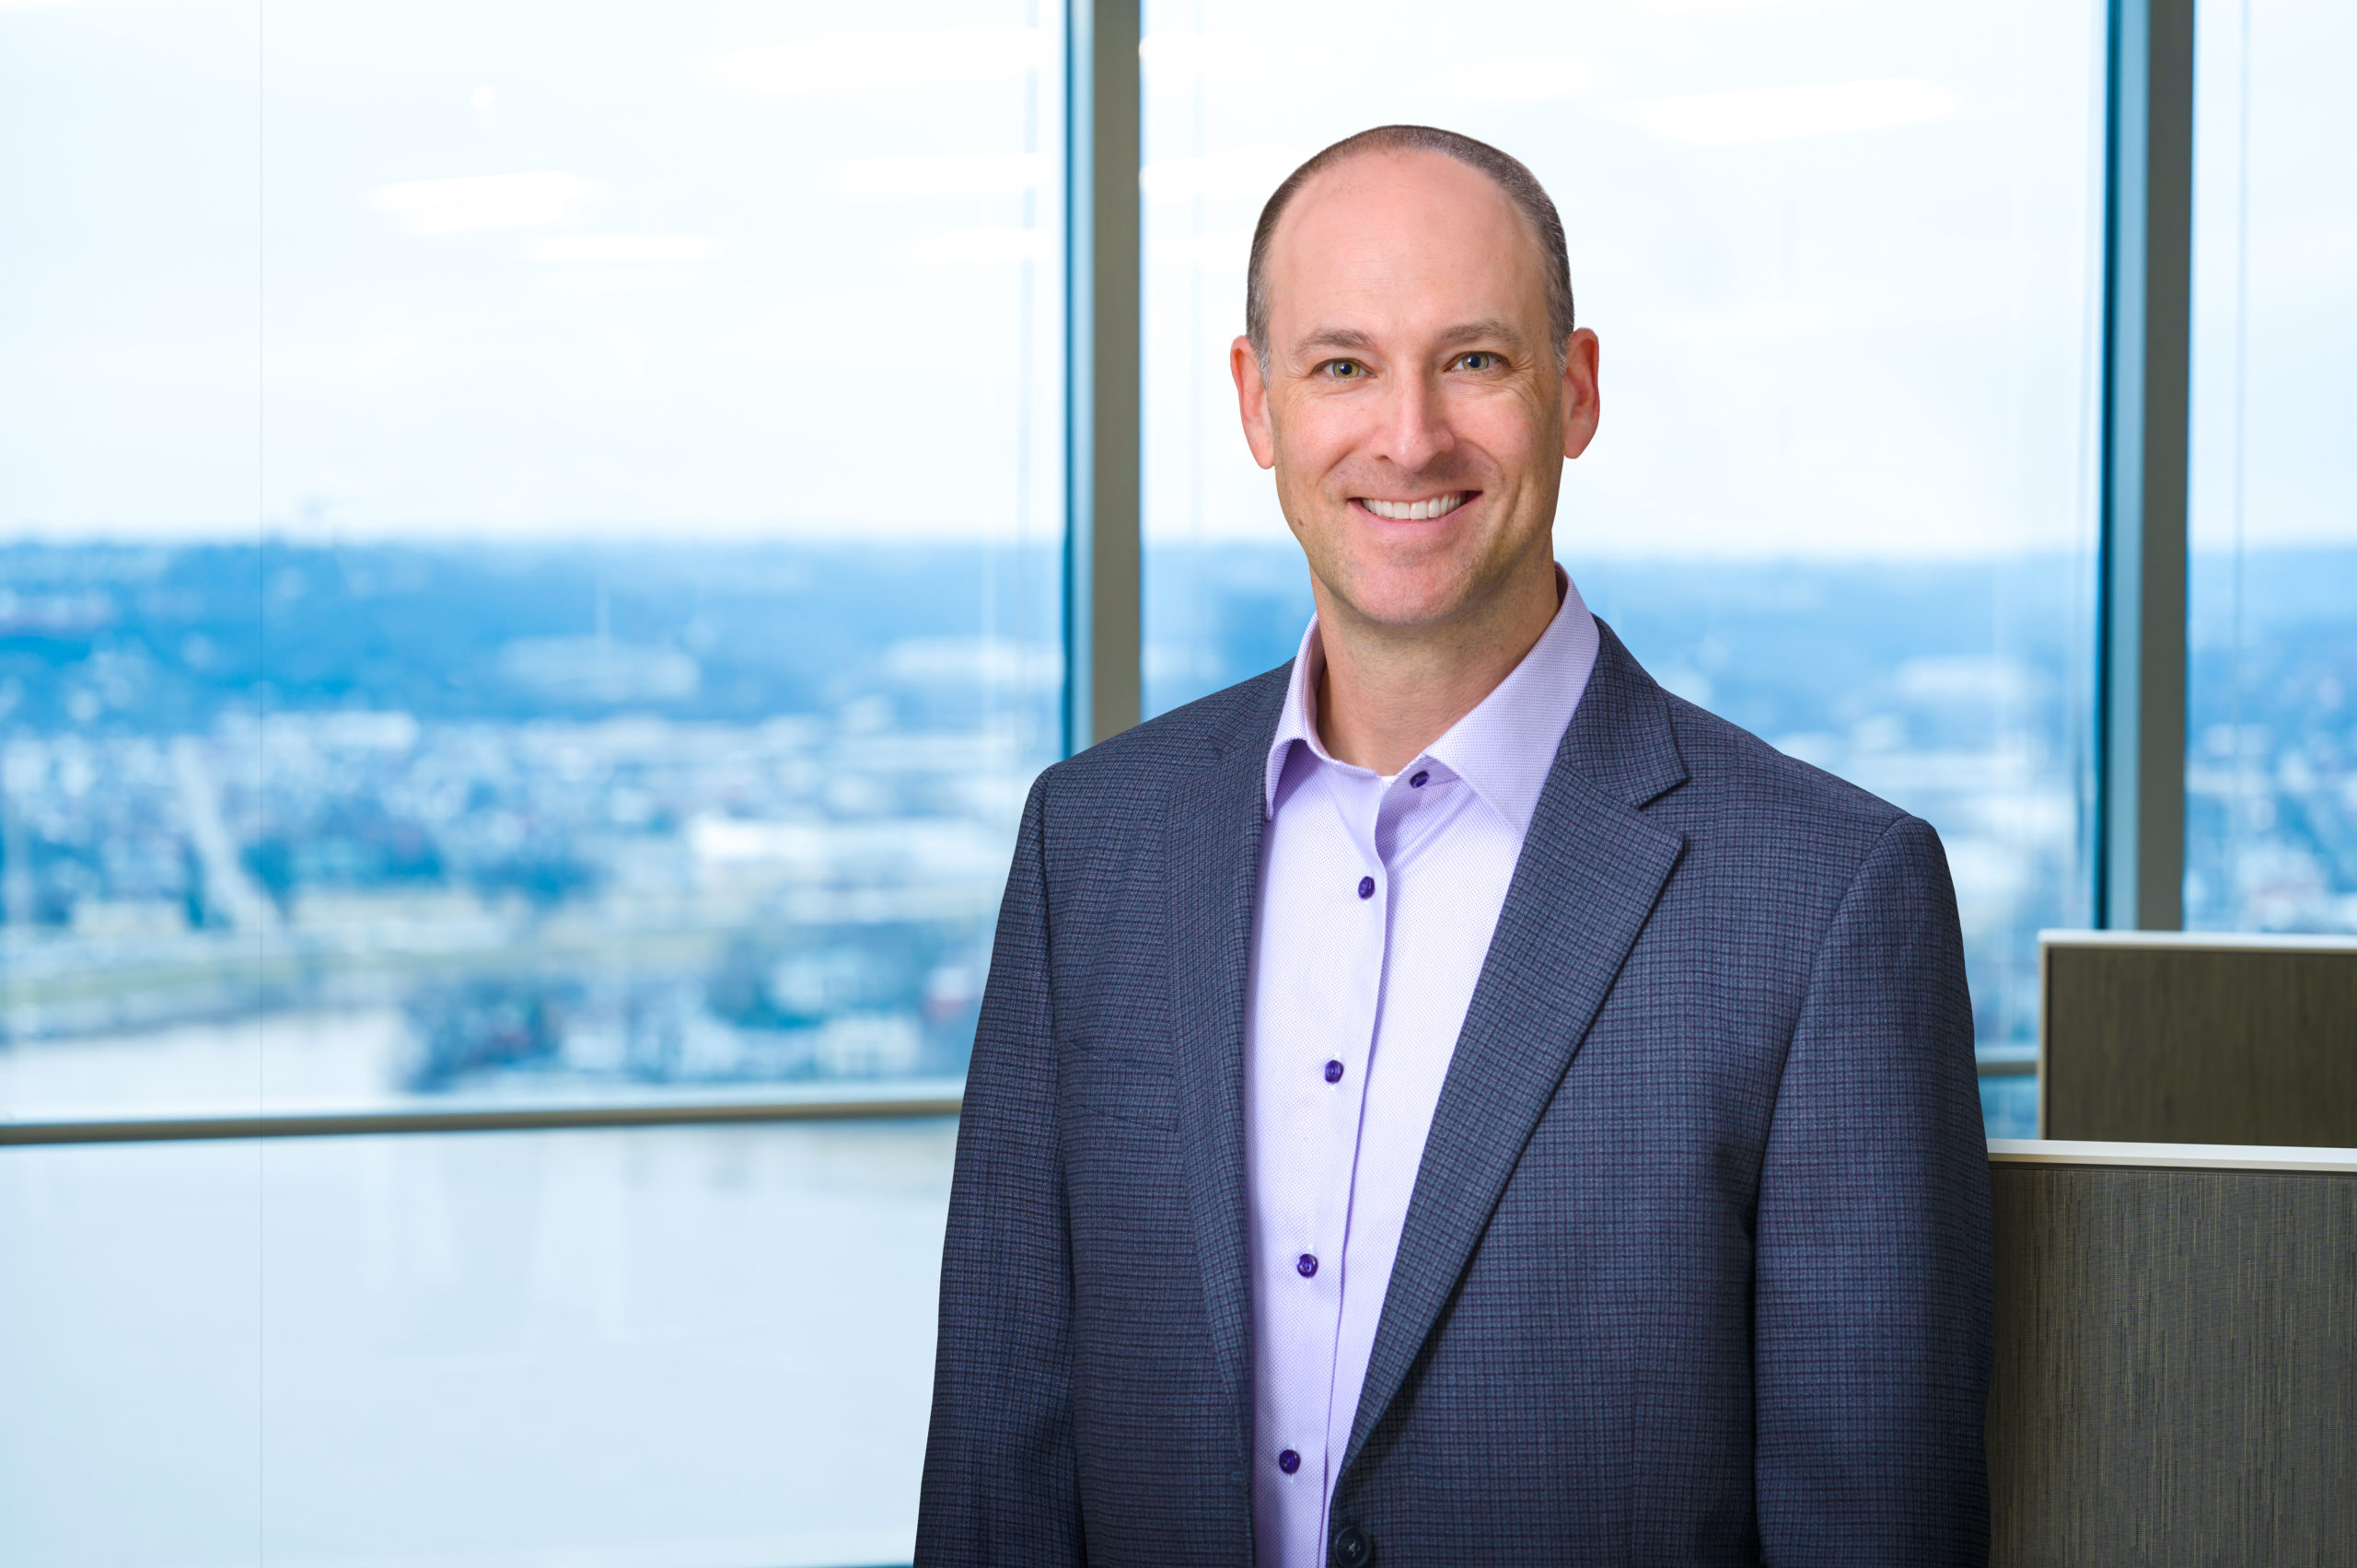 Photo of Adam Symson, president and CEO of The E.W. Scripps Company wearing a blue suit jacket with a light purple shirt standing in front of a window